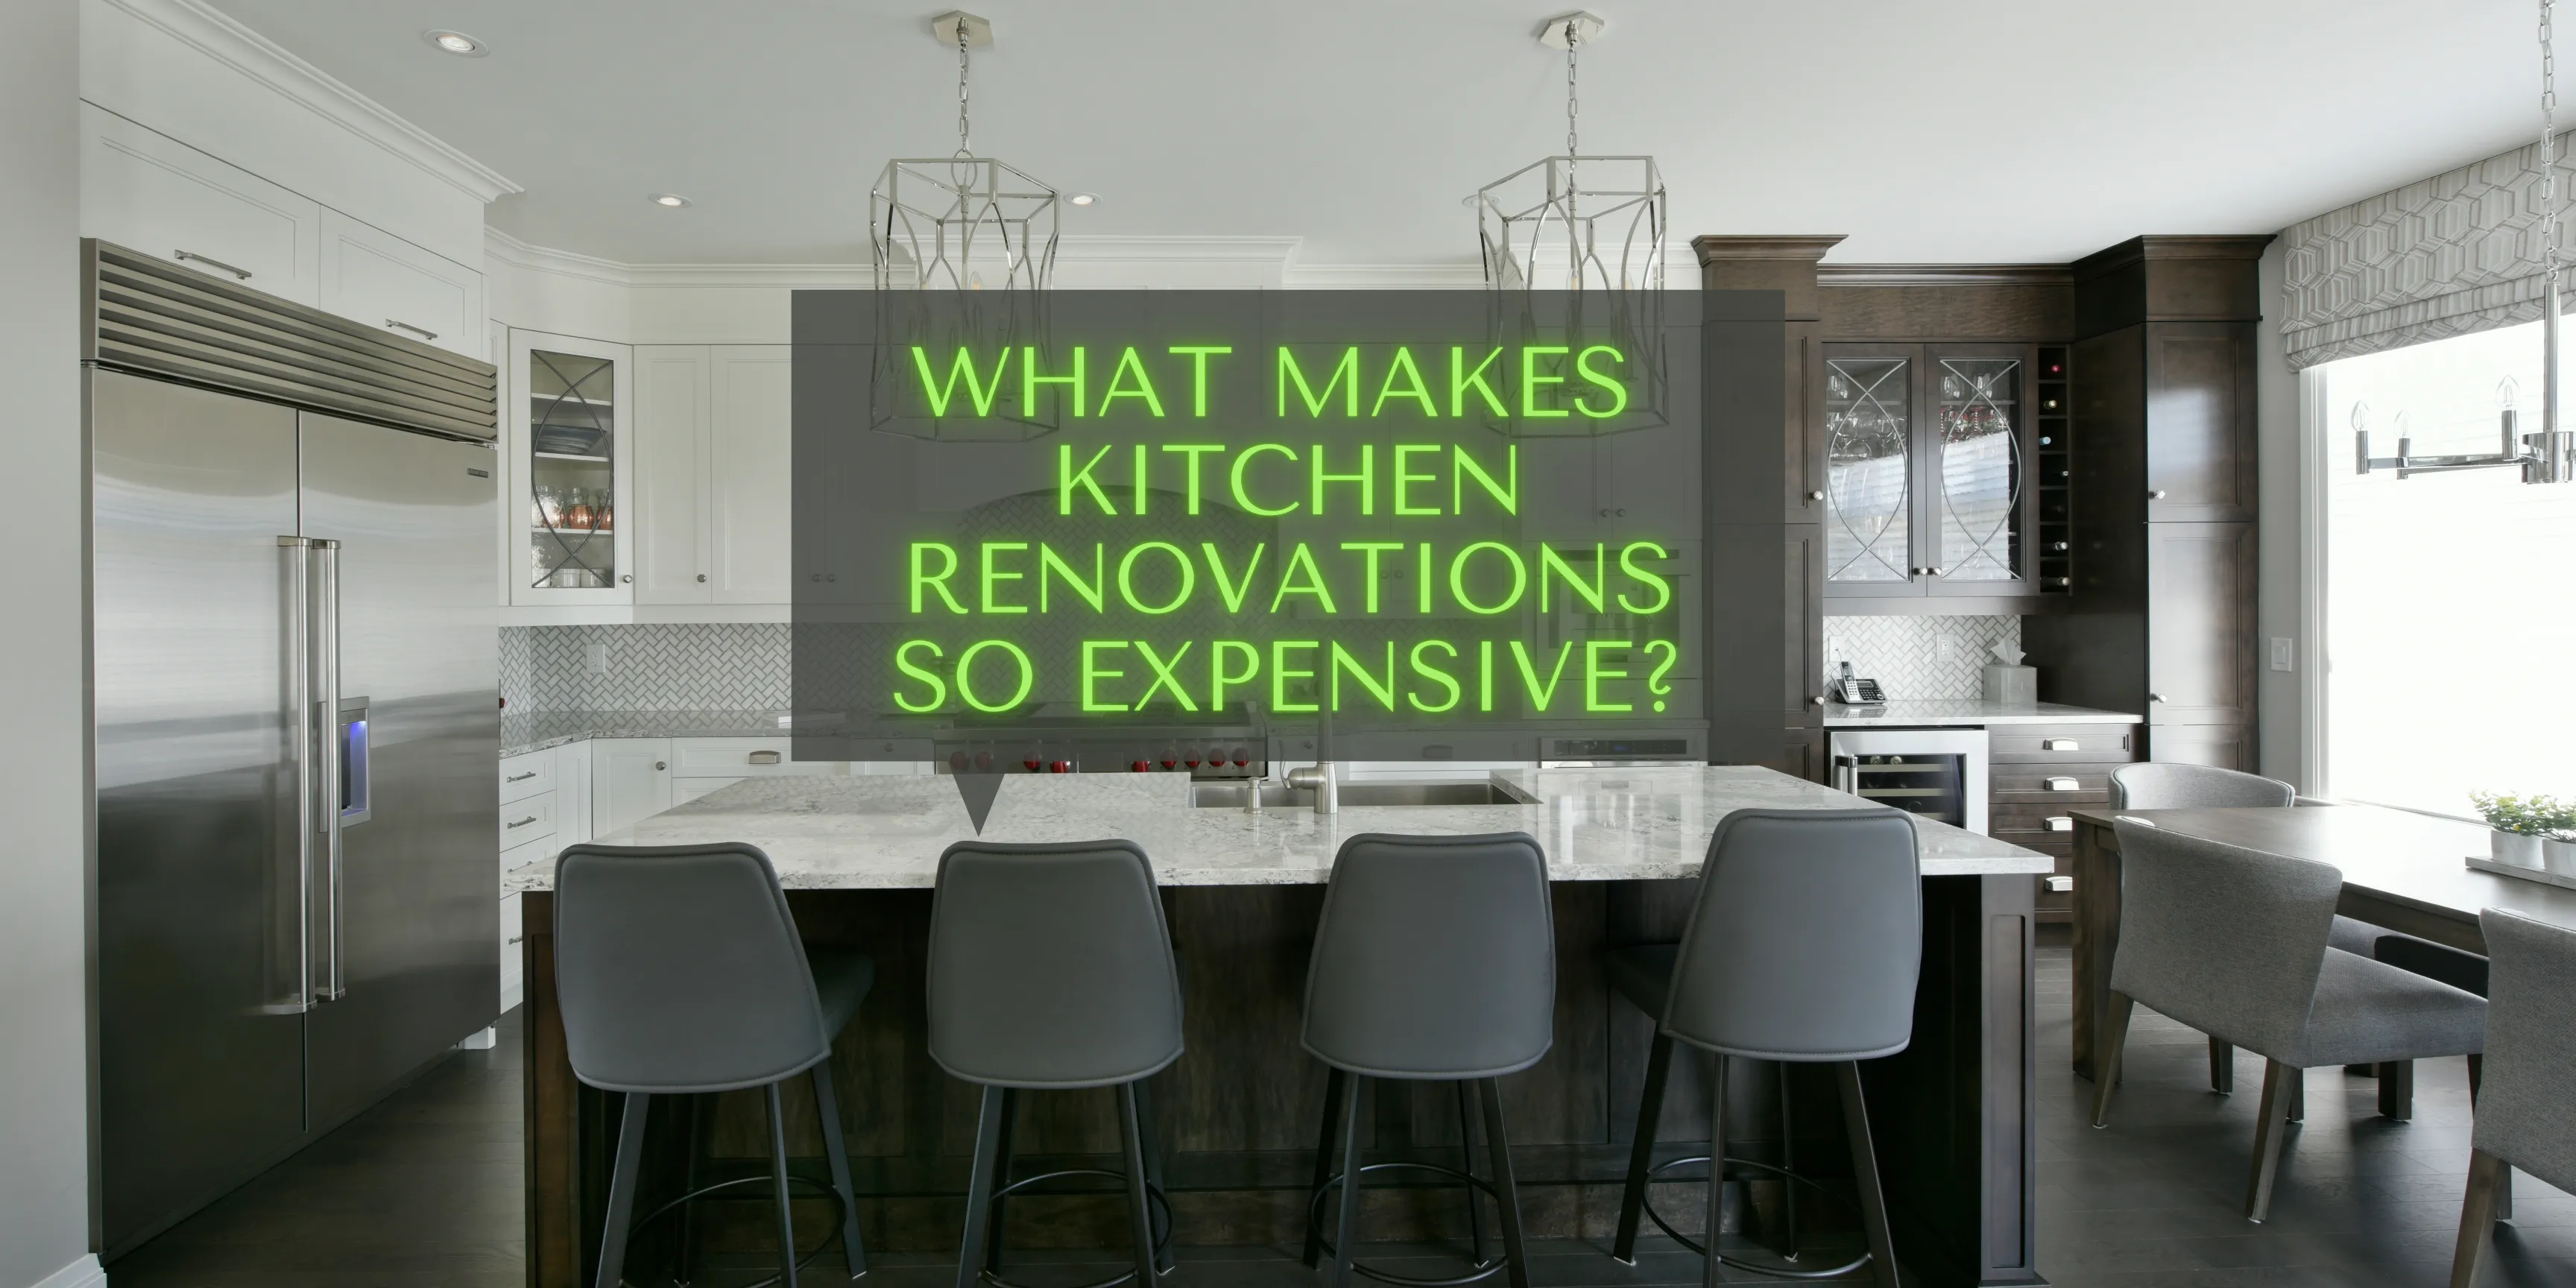 Why Is Renovation More Expensive?